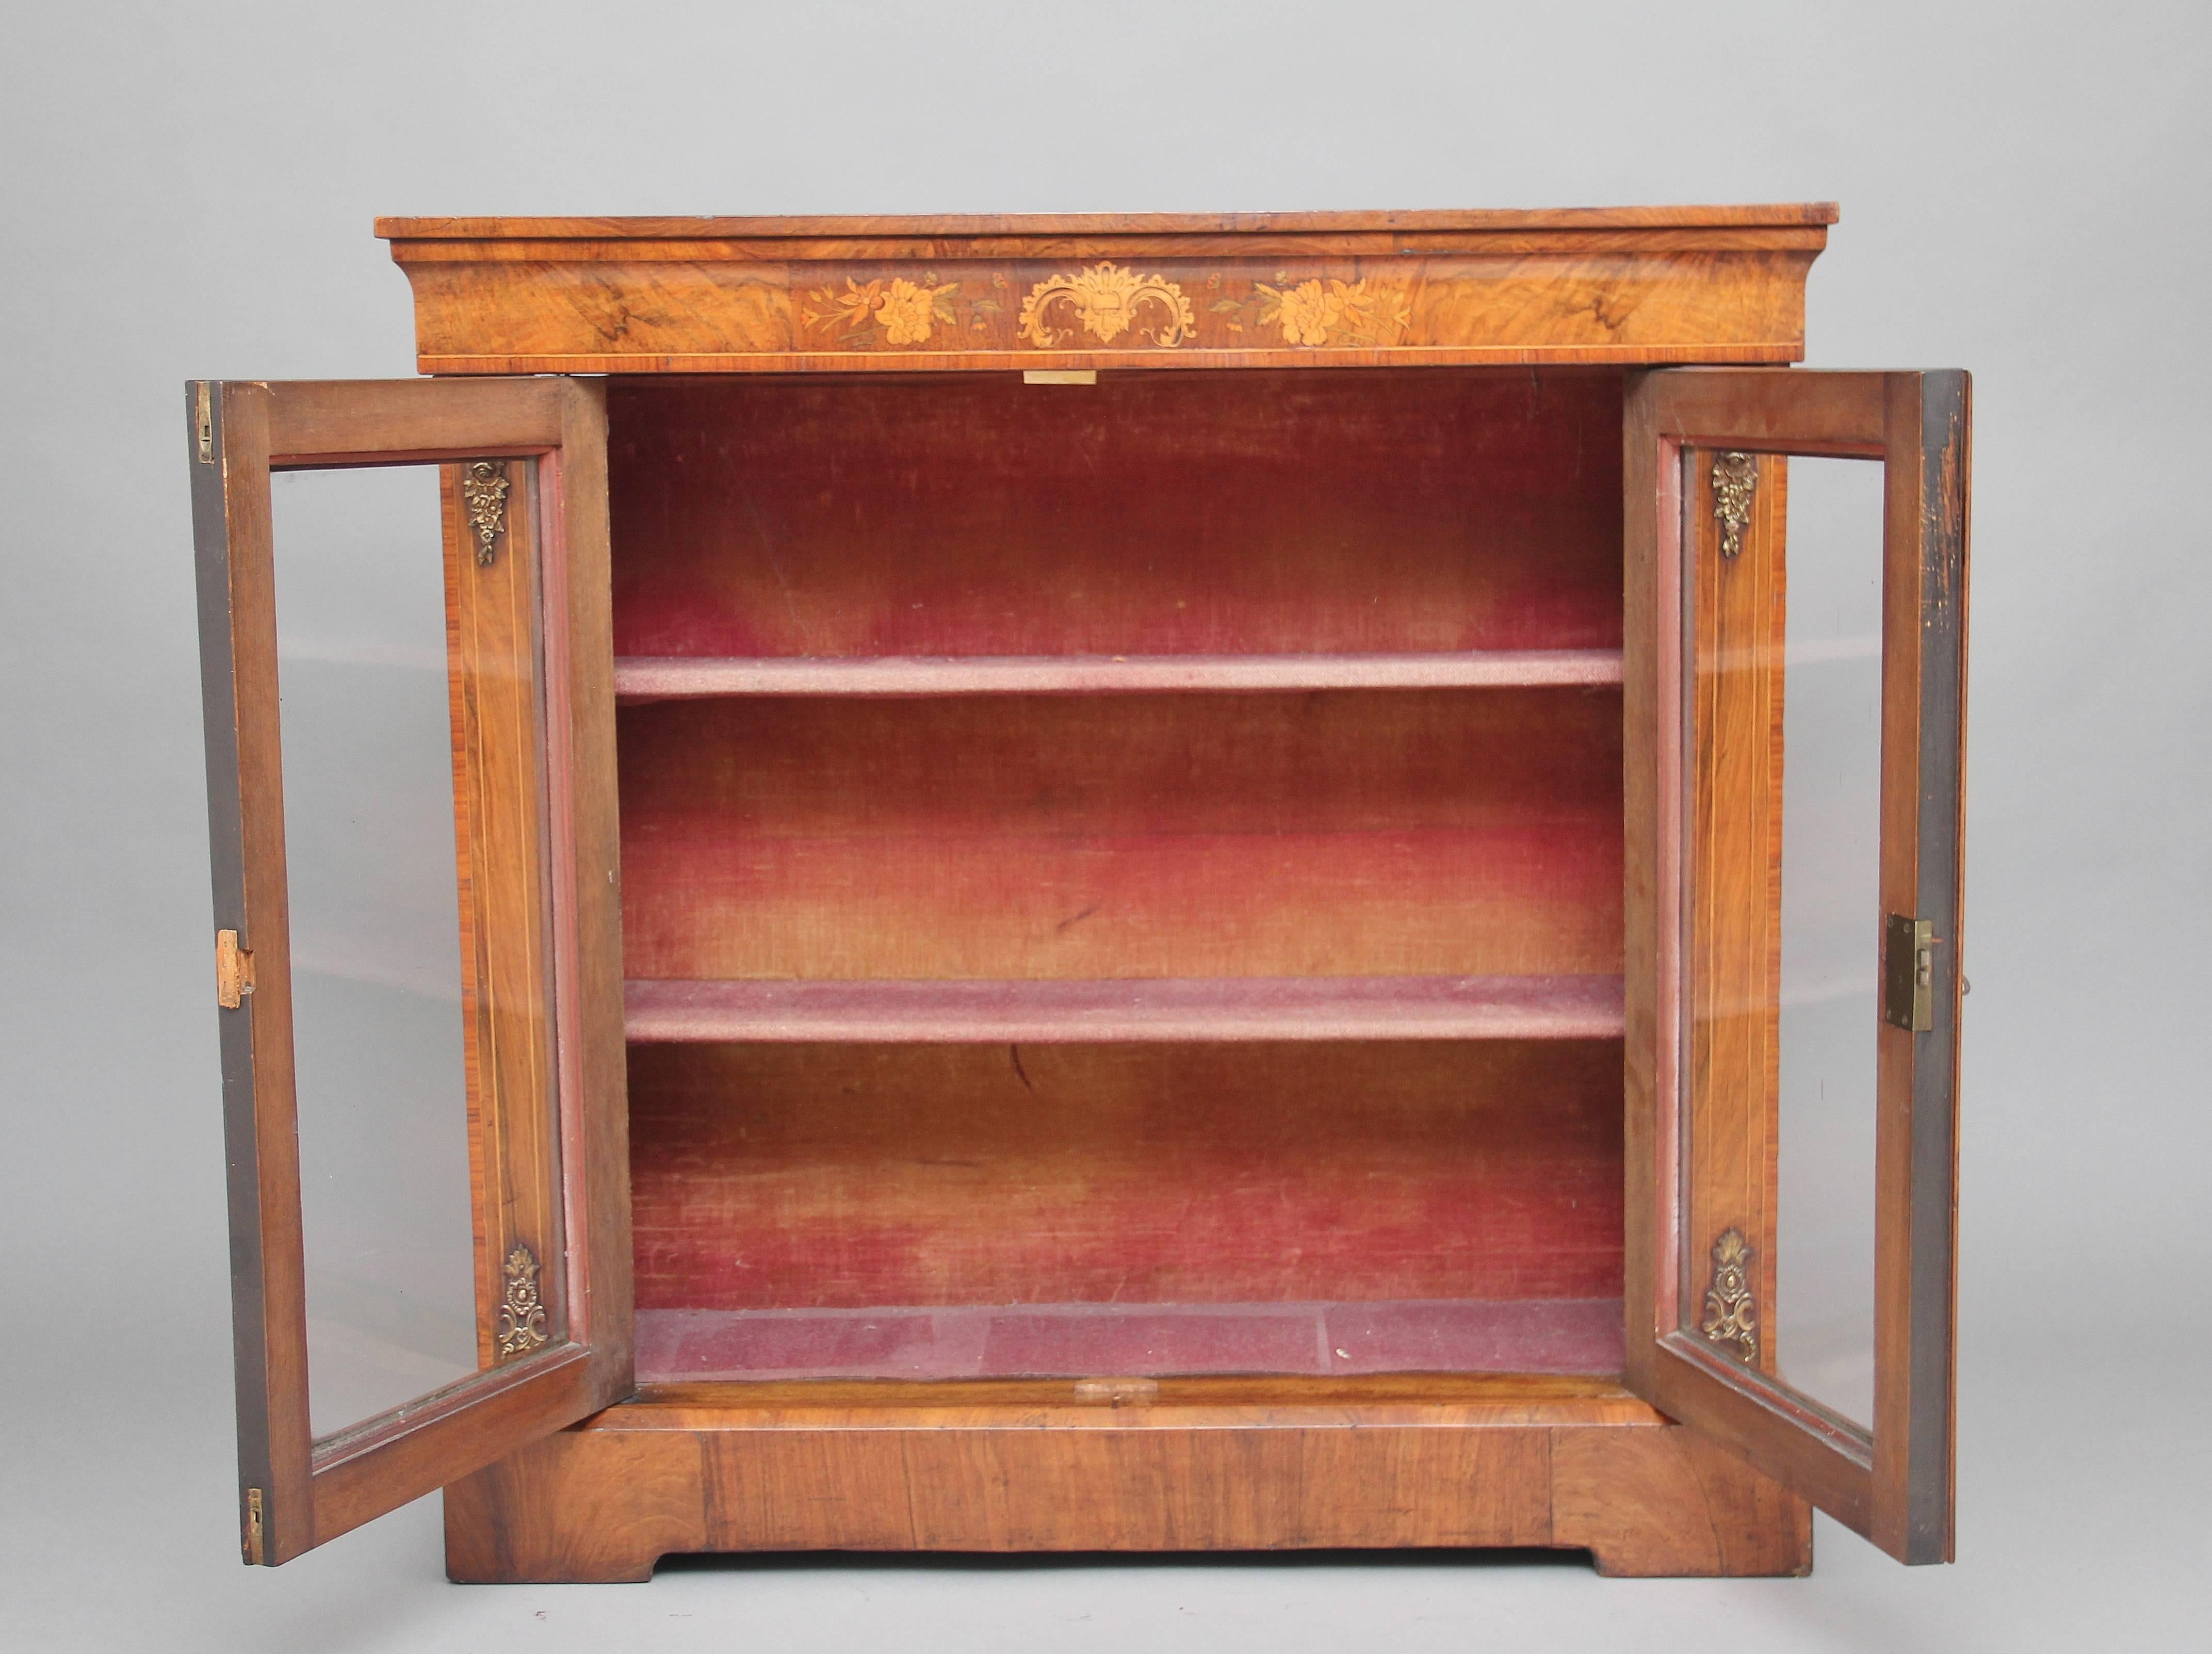 19th century walnut pier cabinet or bookcase, the rectangular top above a frieze which is wonderfully inlaid with floral decoration, above a pair of glazed doors with the door frames inlaid with boxwood lines, opening to reveal two fixed shelves